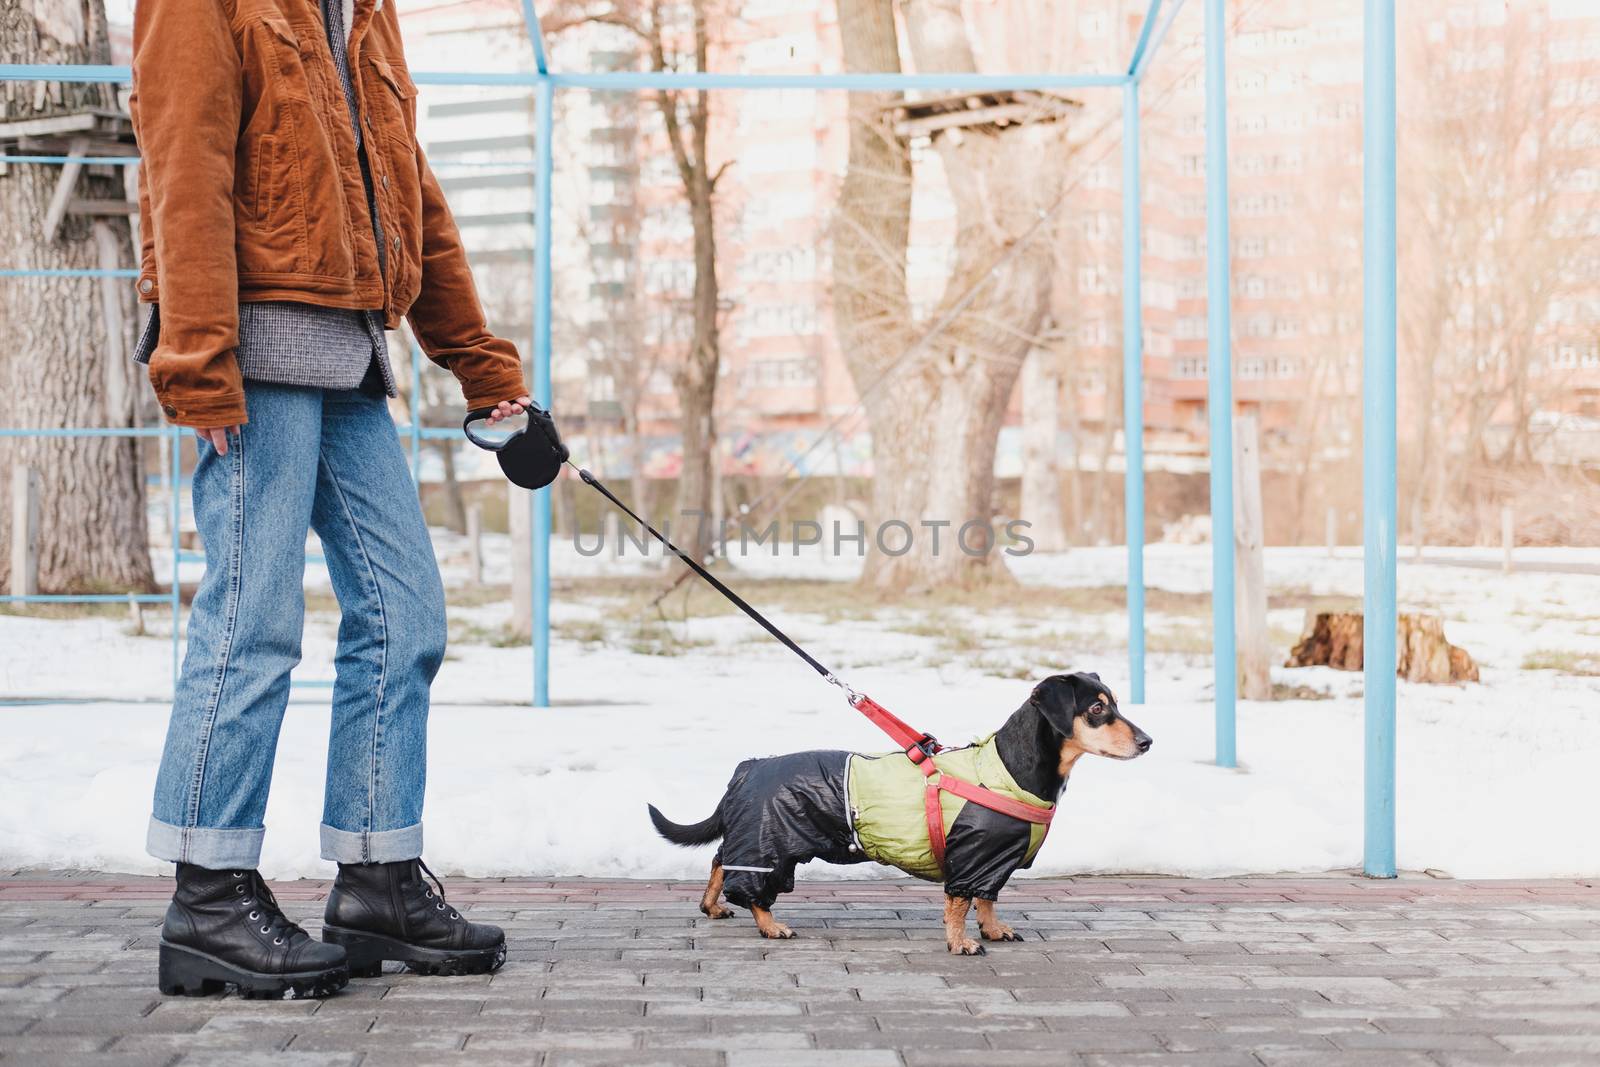 Walking a dog on the leash at park. Female person with a dachshund at walk, snowy season